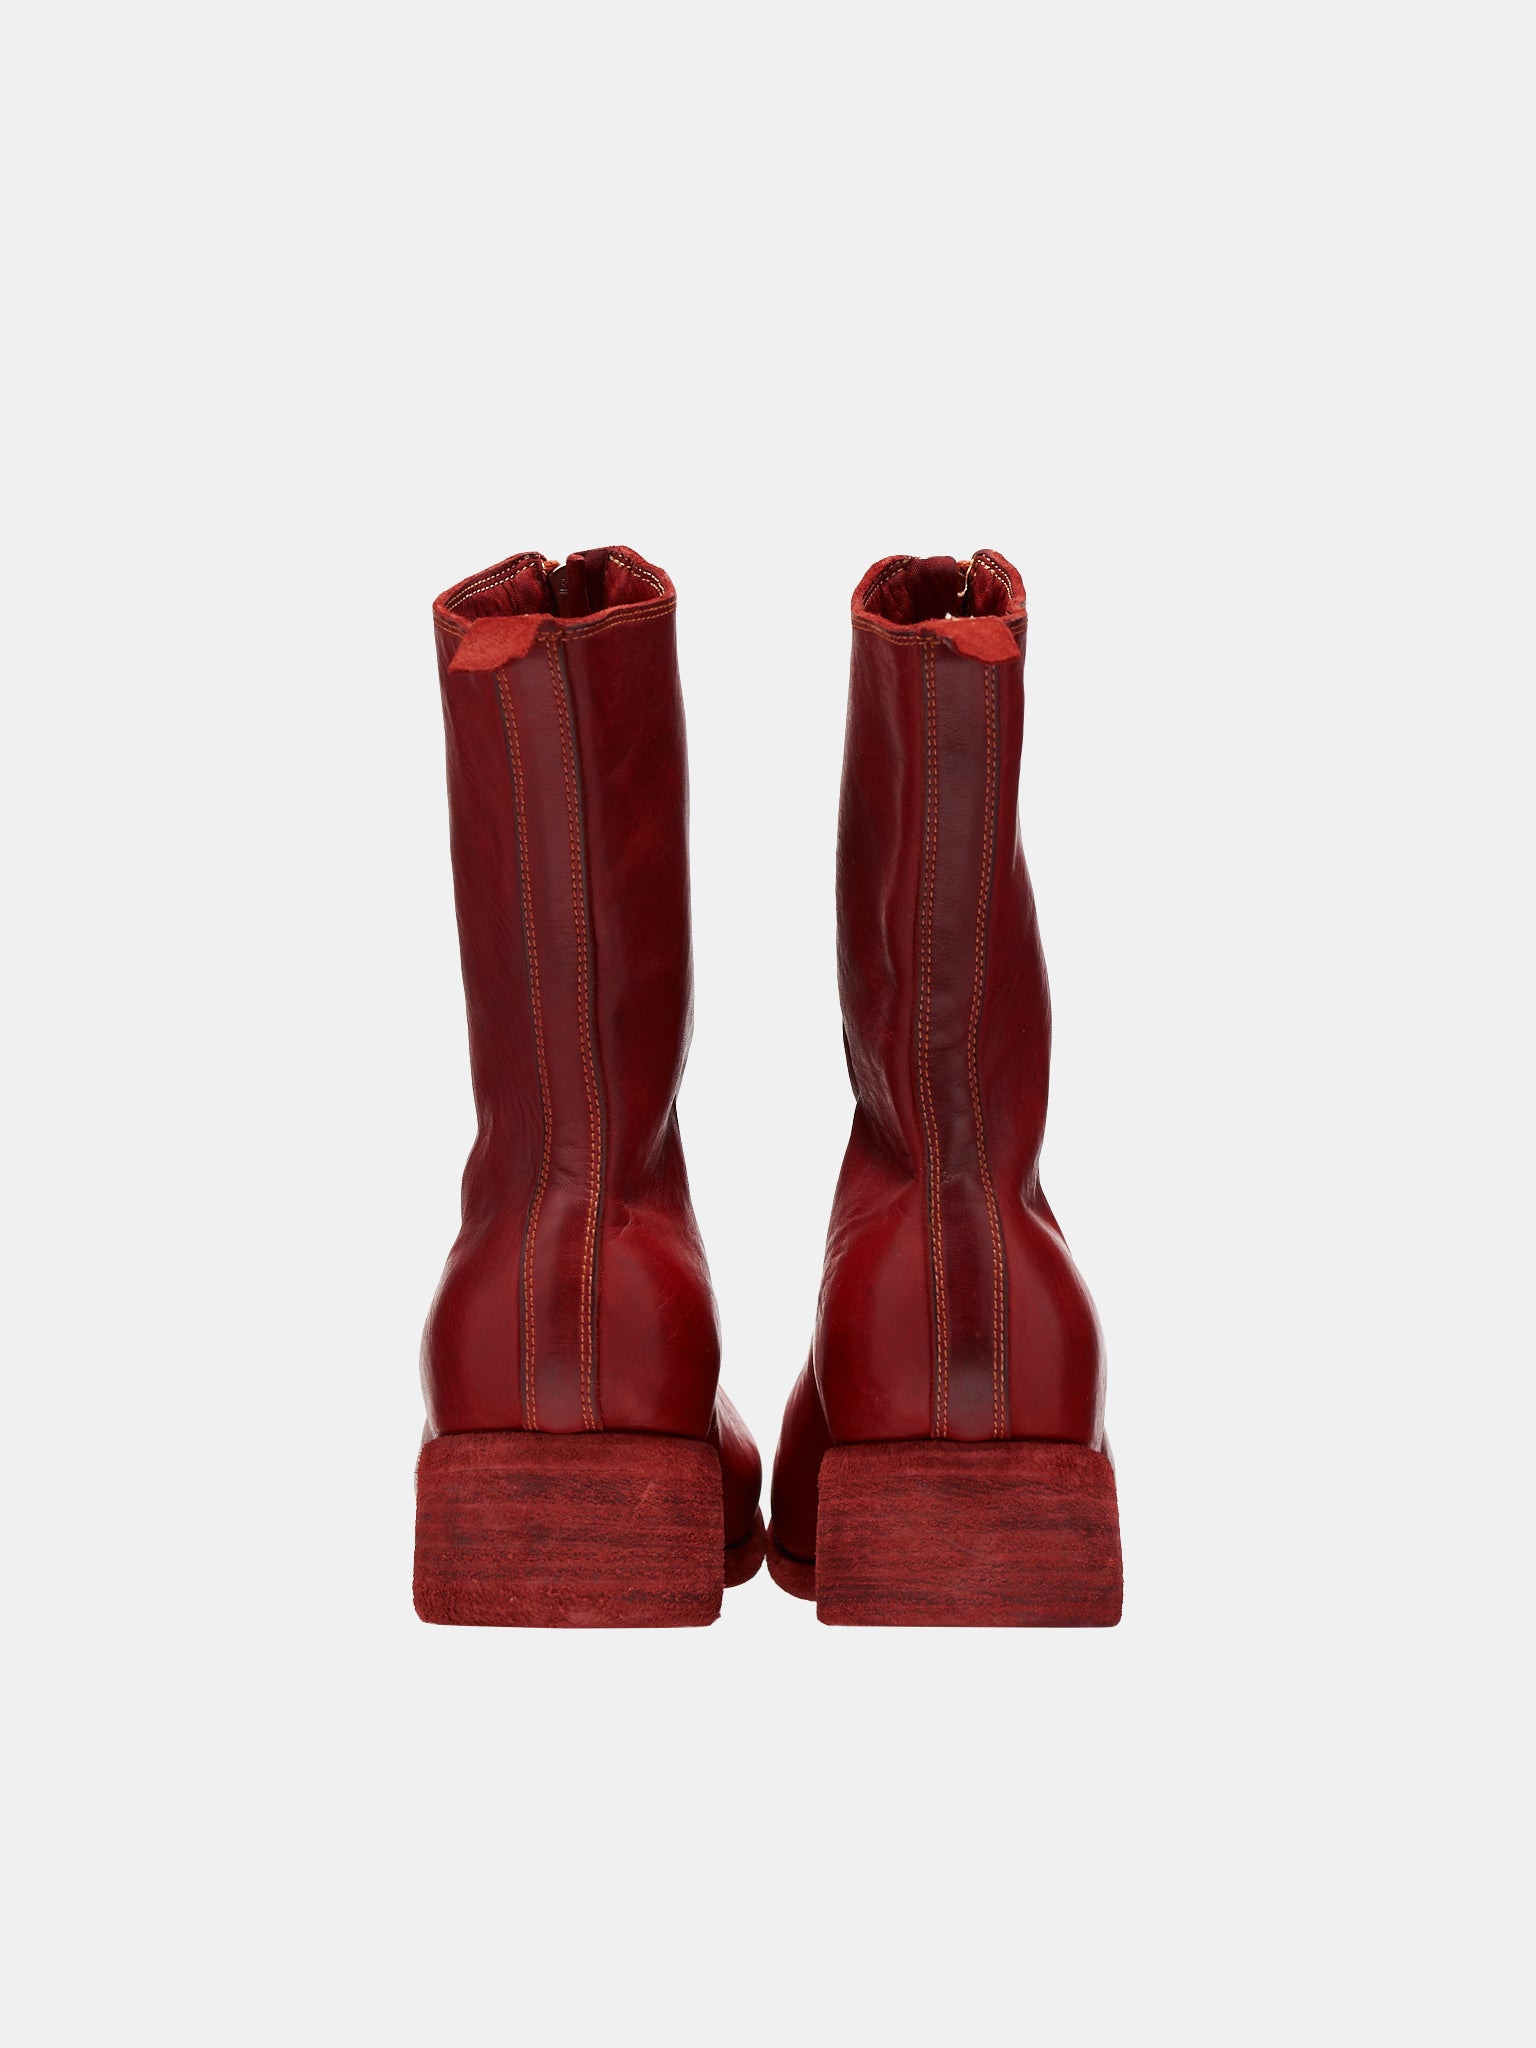 PL2 Horse Leather Boots (PL2-HORSE-FULL-GRAIN-RED)